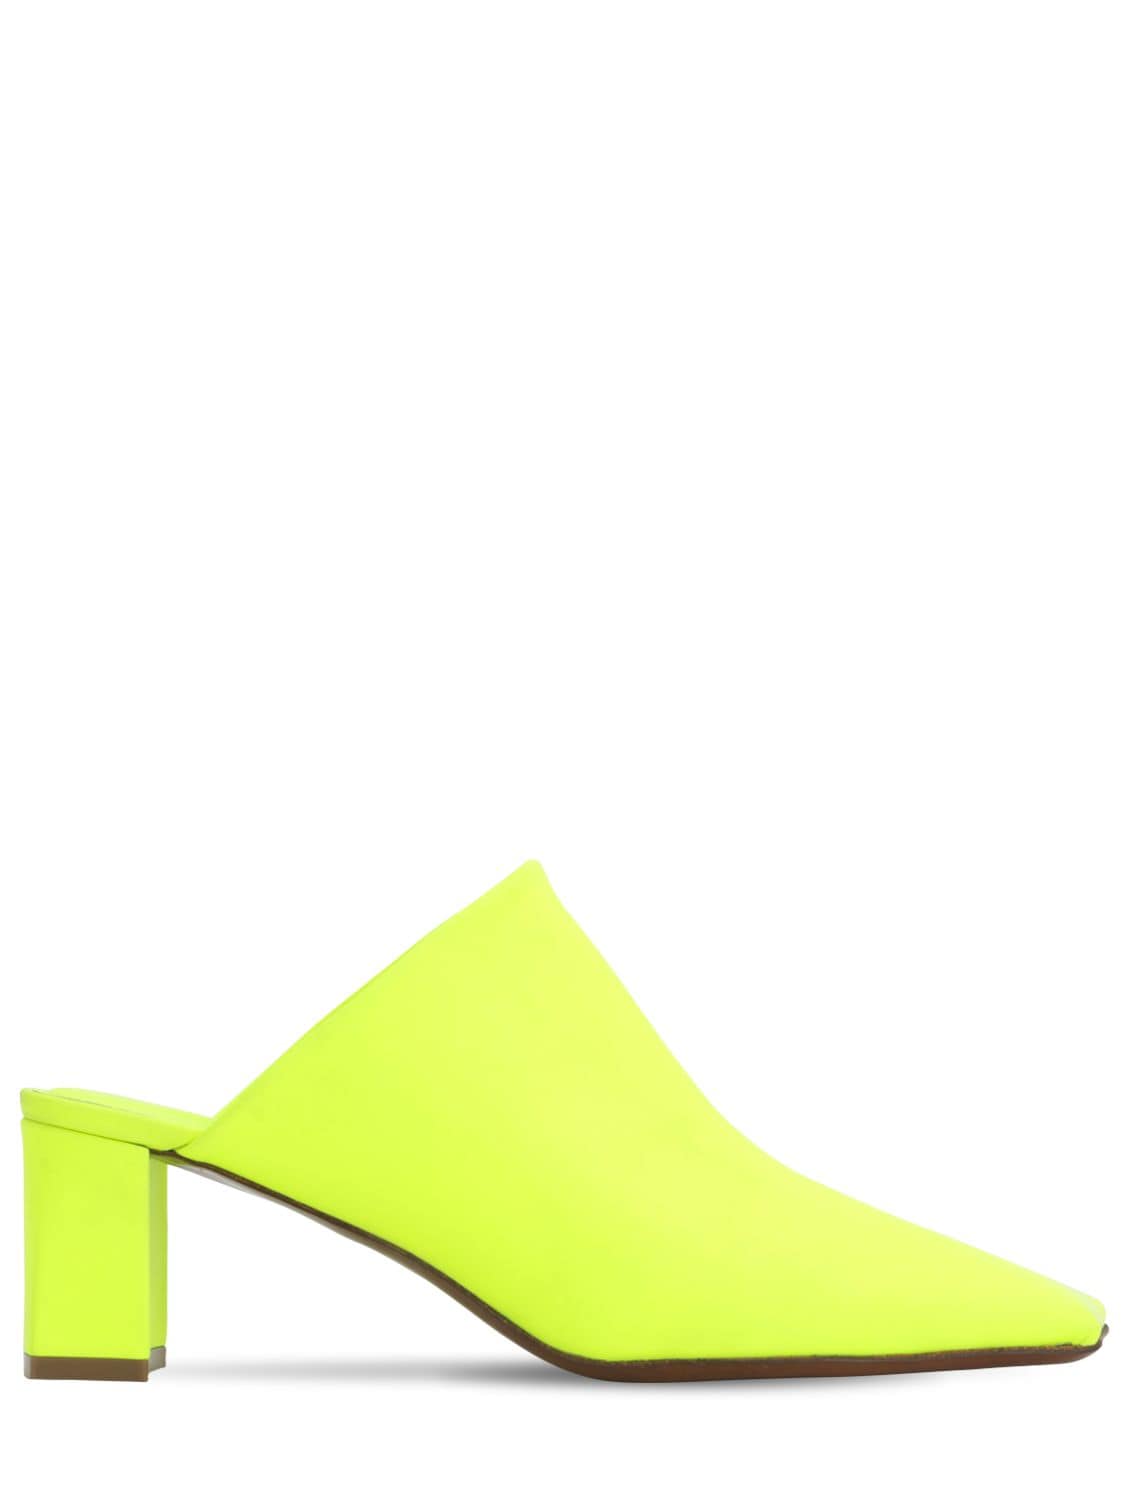 Vetements 60mm Boomerang Patent Leather Mules In Yellow